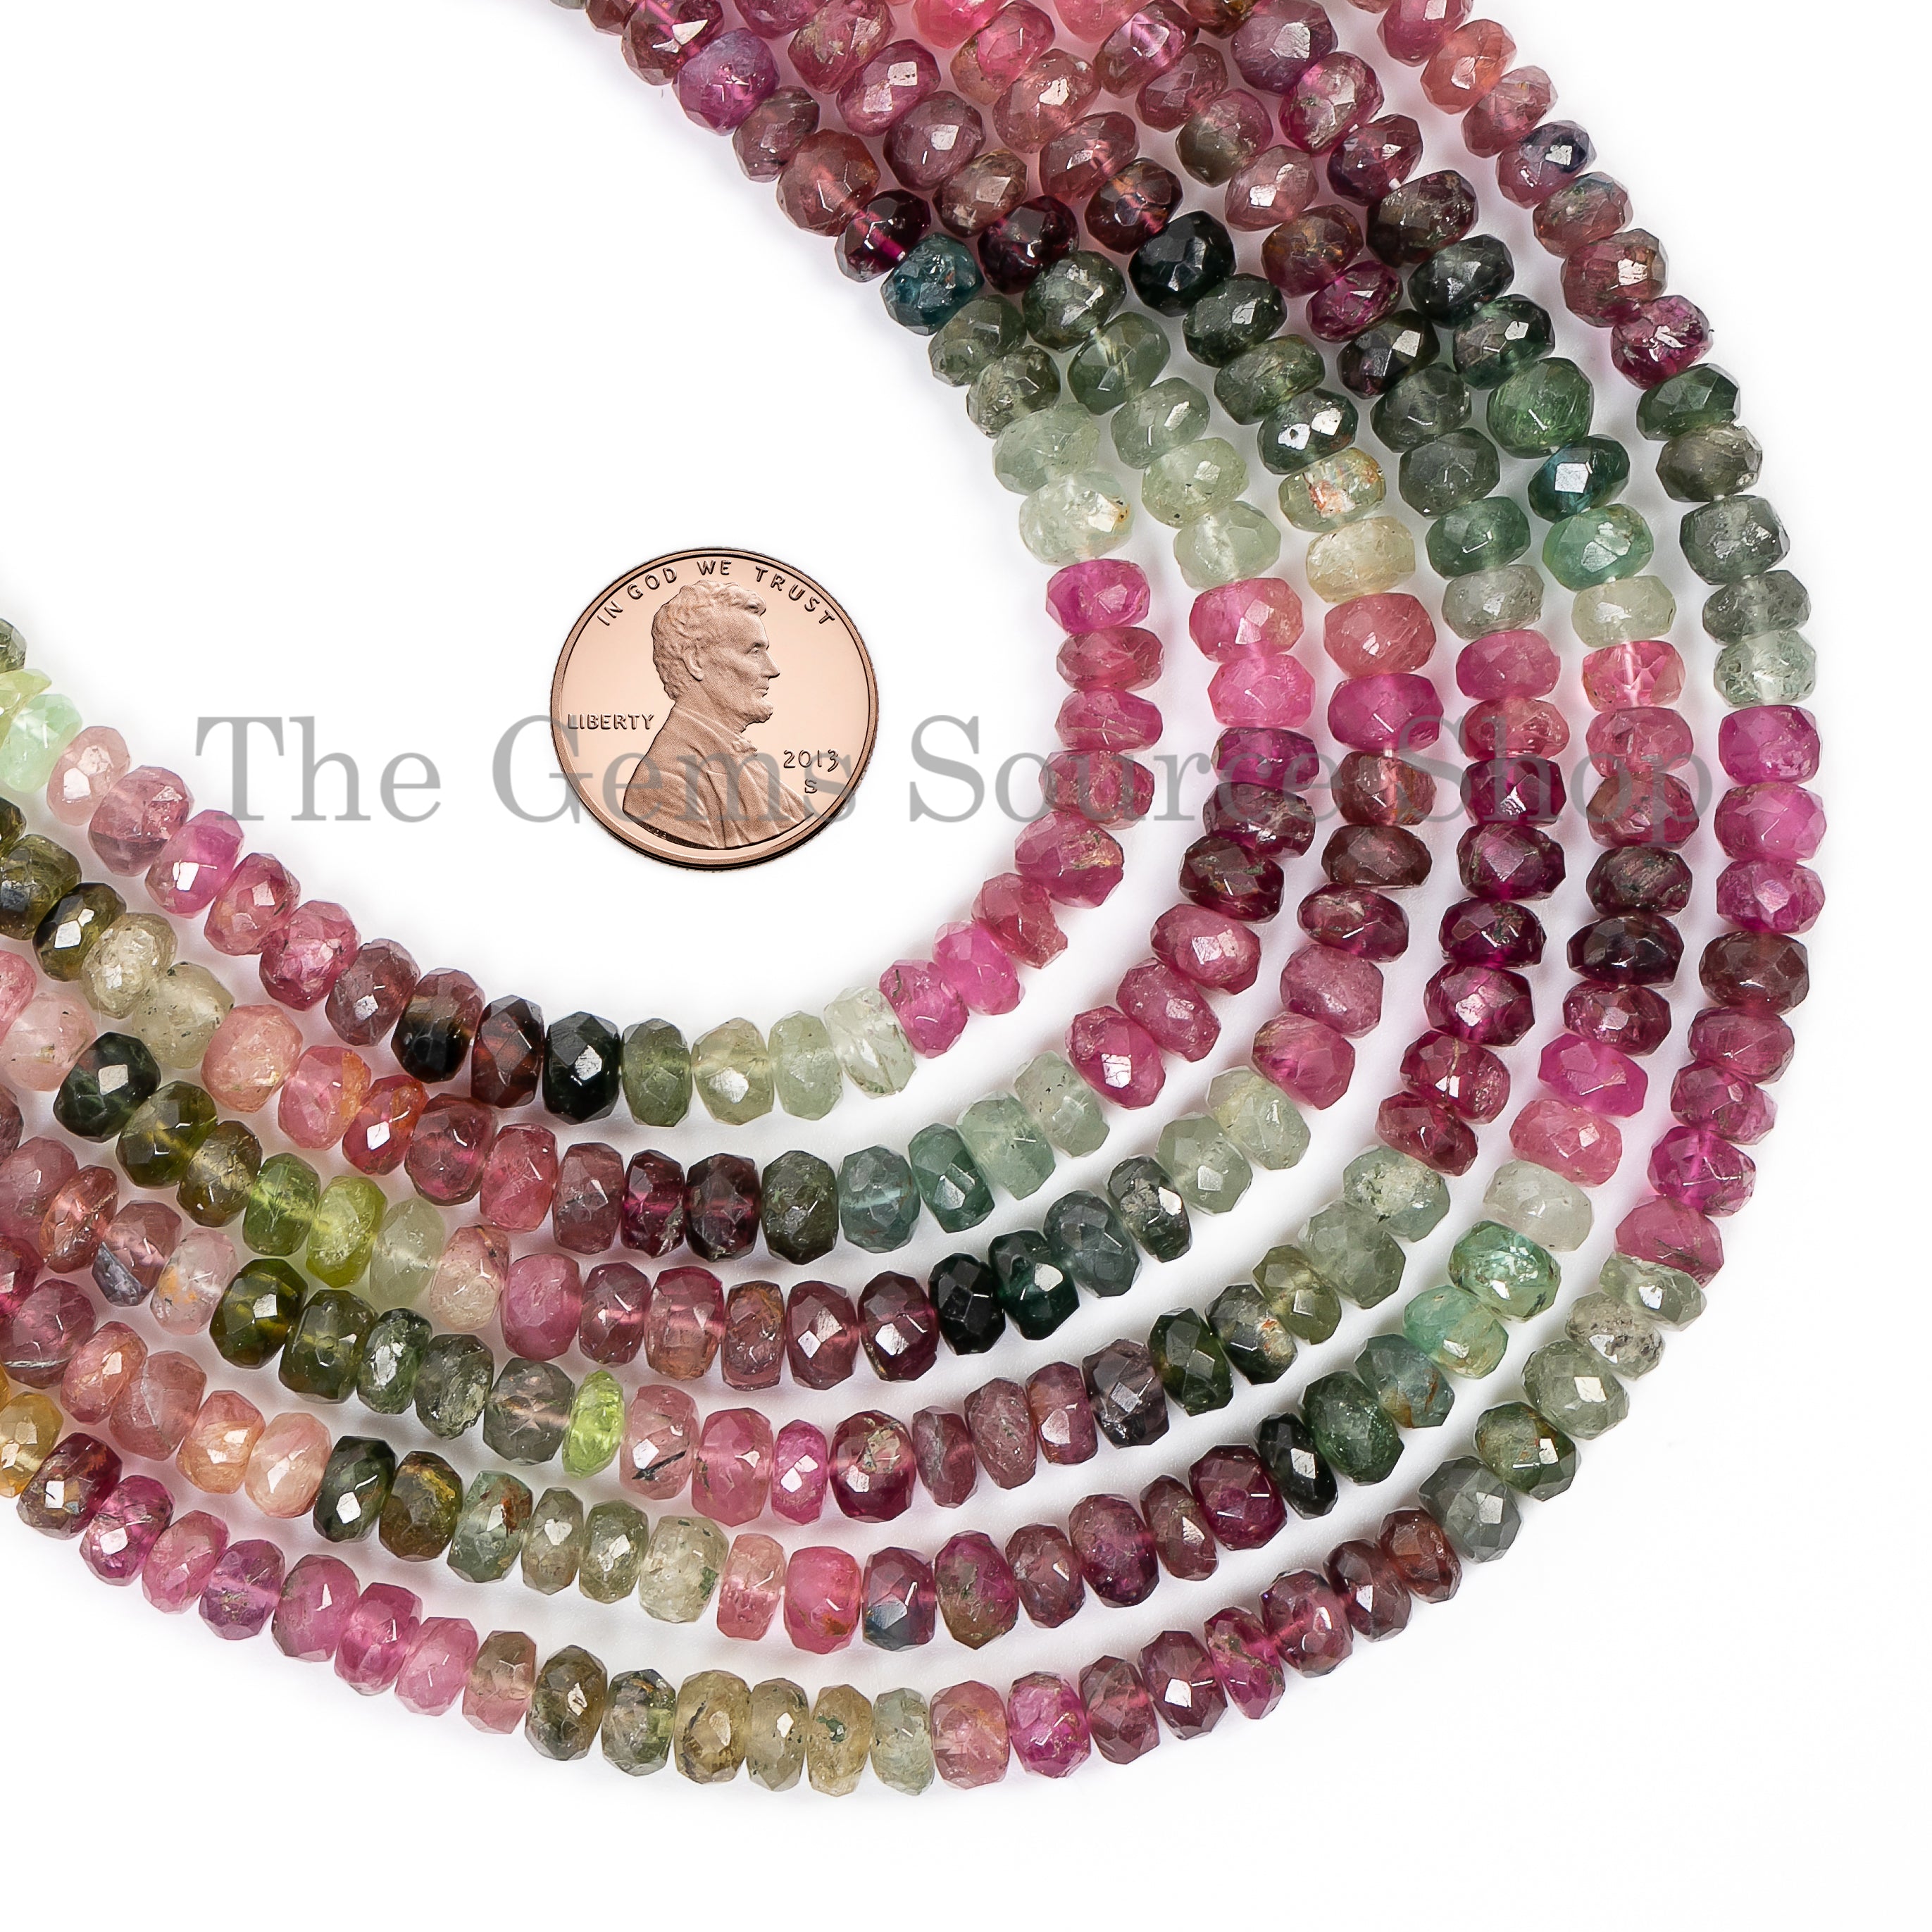 5.5-6 mm multi tourmaline faceted rondelle shape beads TGS-4744